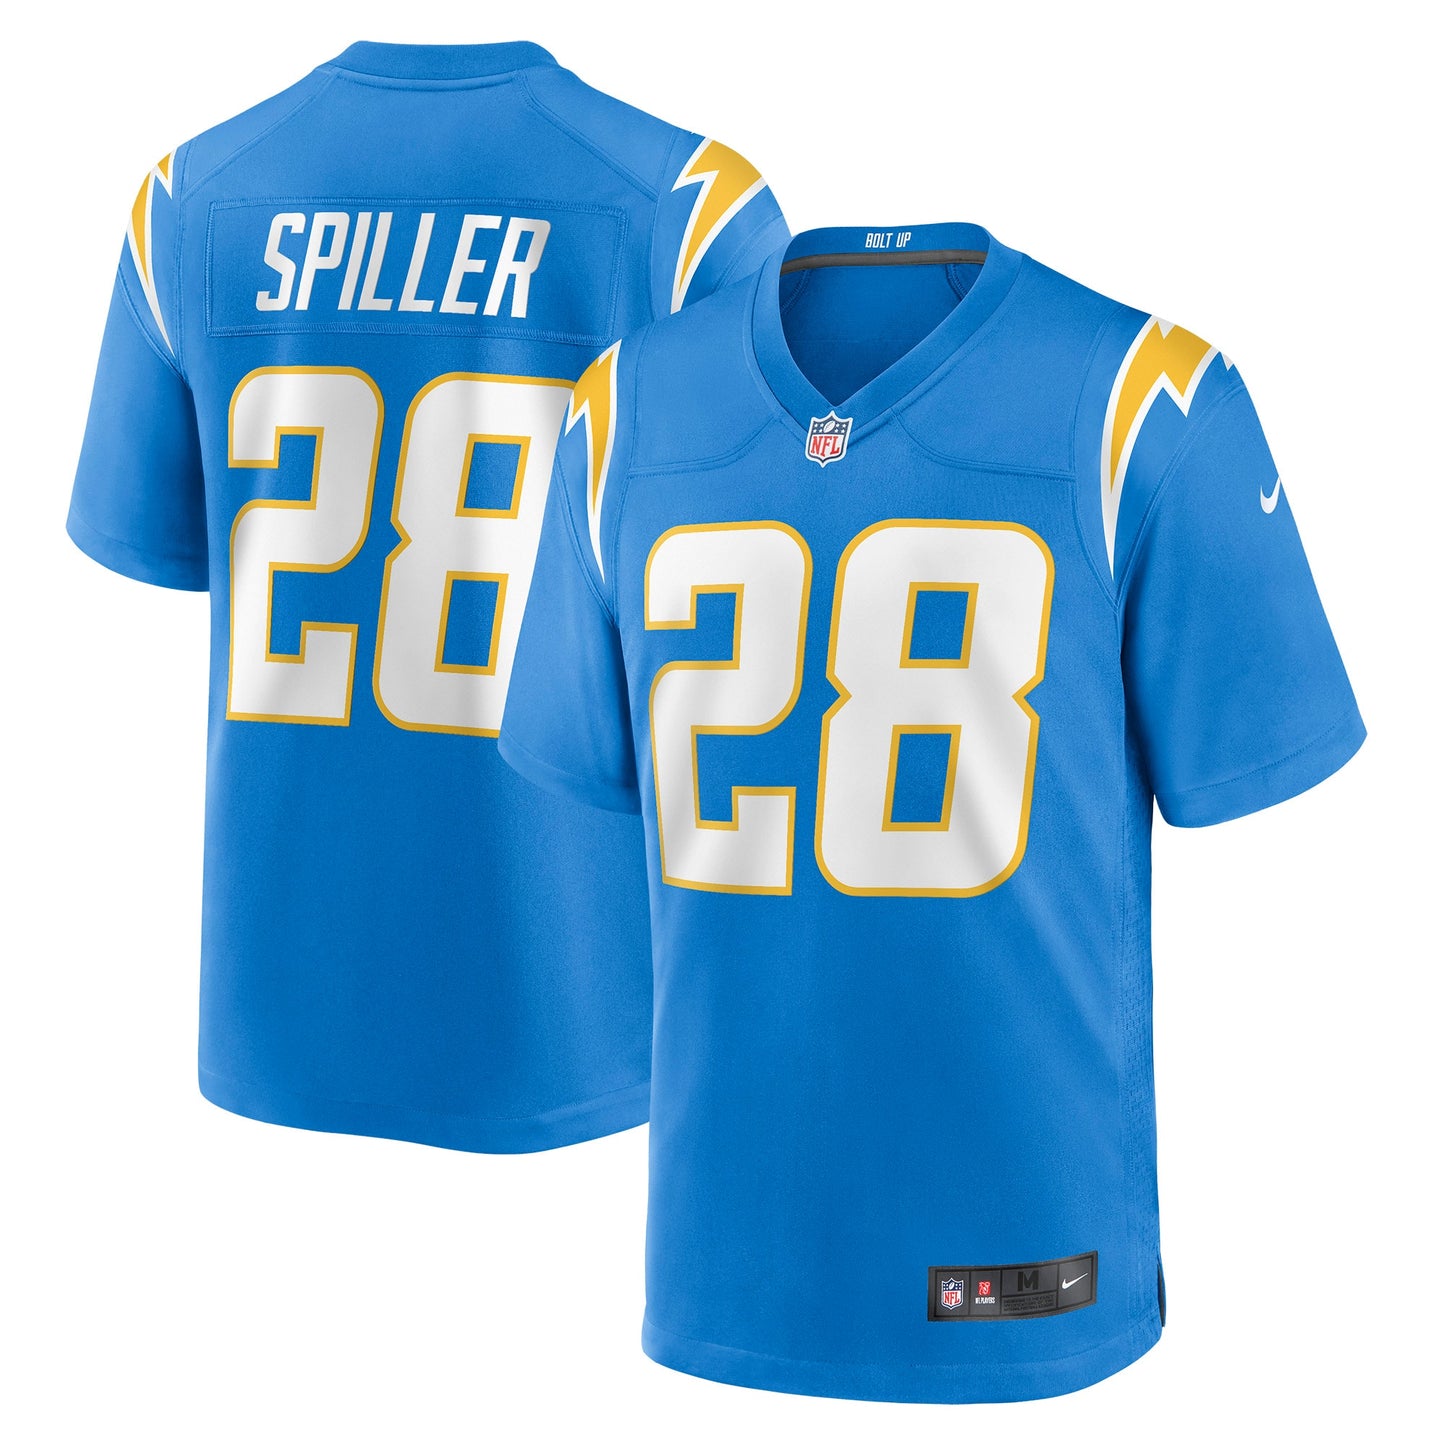 Isaiah Spiller Los Angeles Chargers Nike Game Jersey - Powder Blue